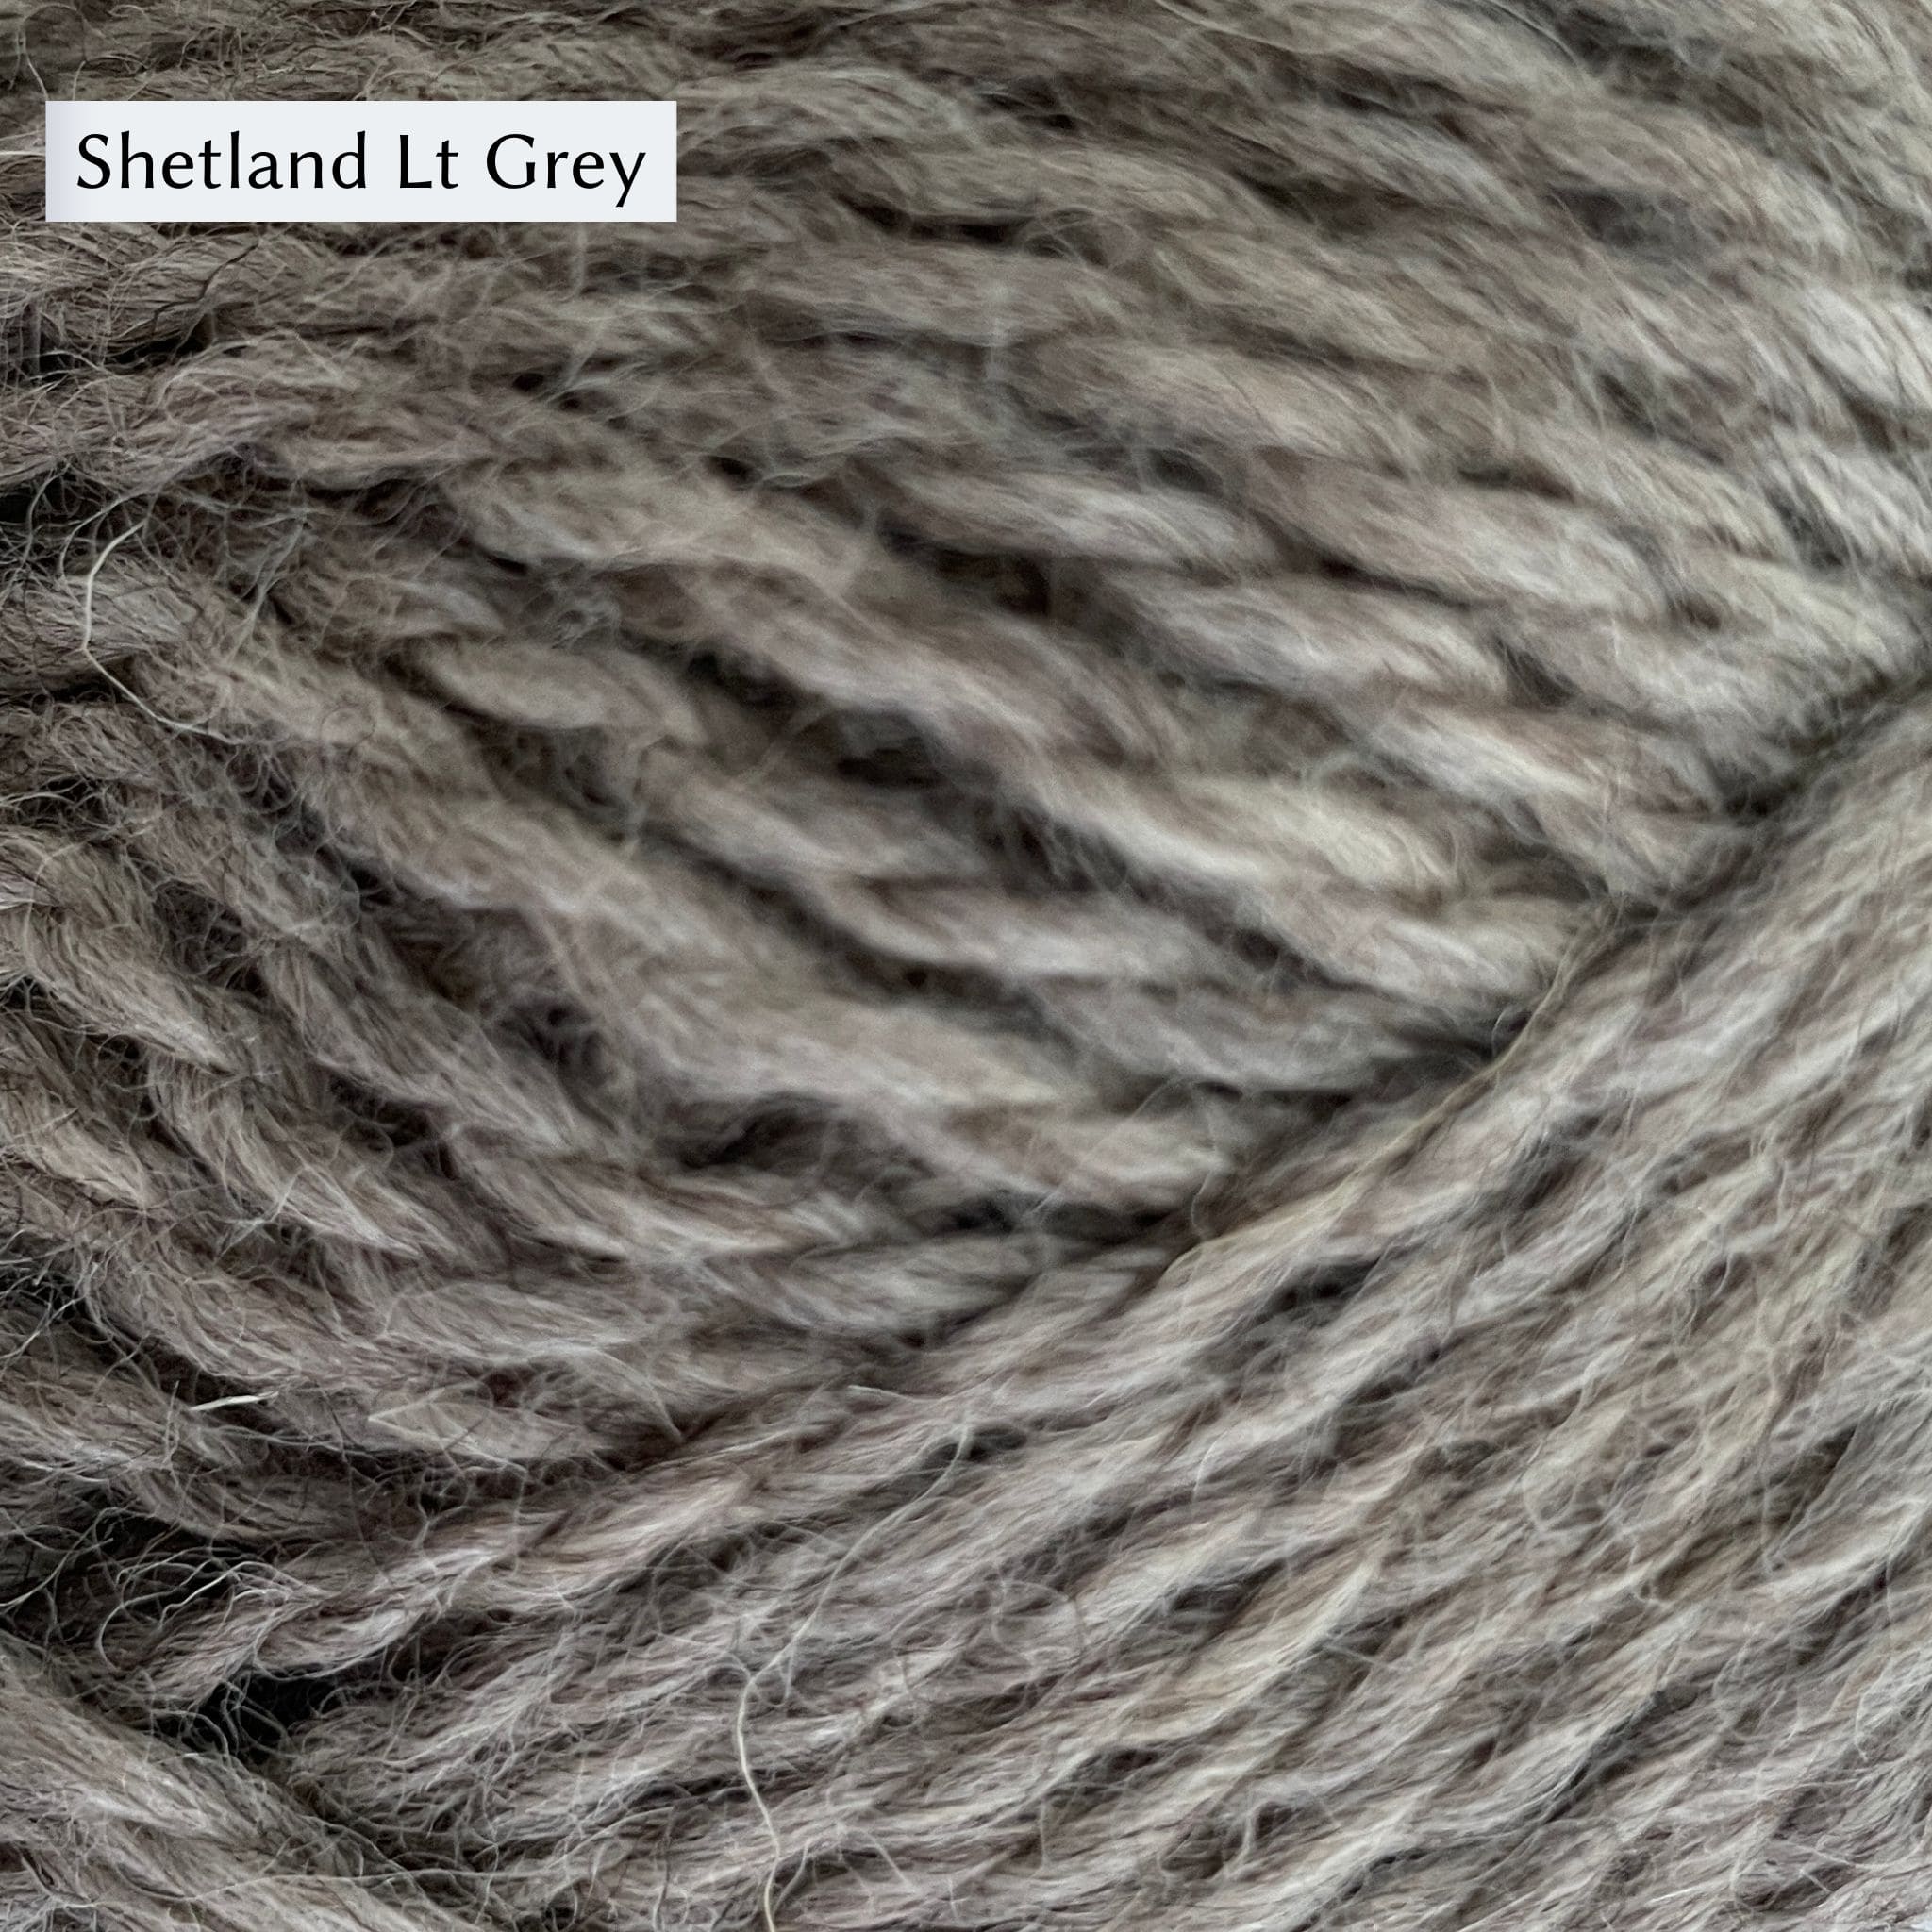 Jamieson & Smith Aran Worsted Yarn close up photo of Shetland Lt Grey Colorway which is a true grey color.